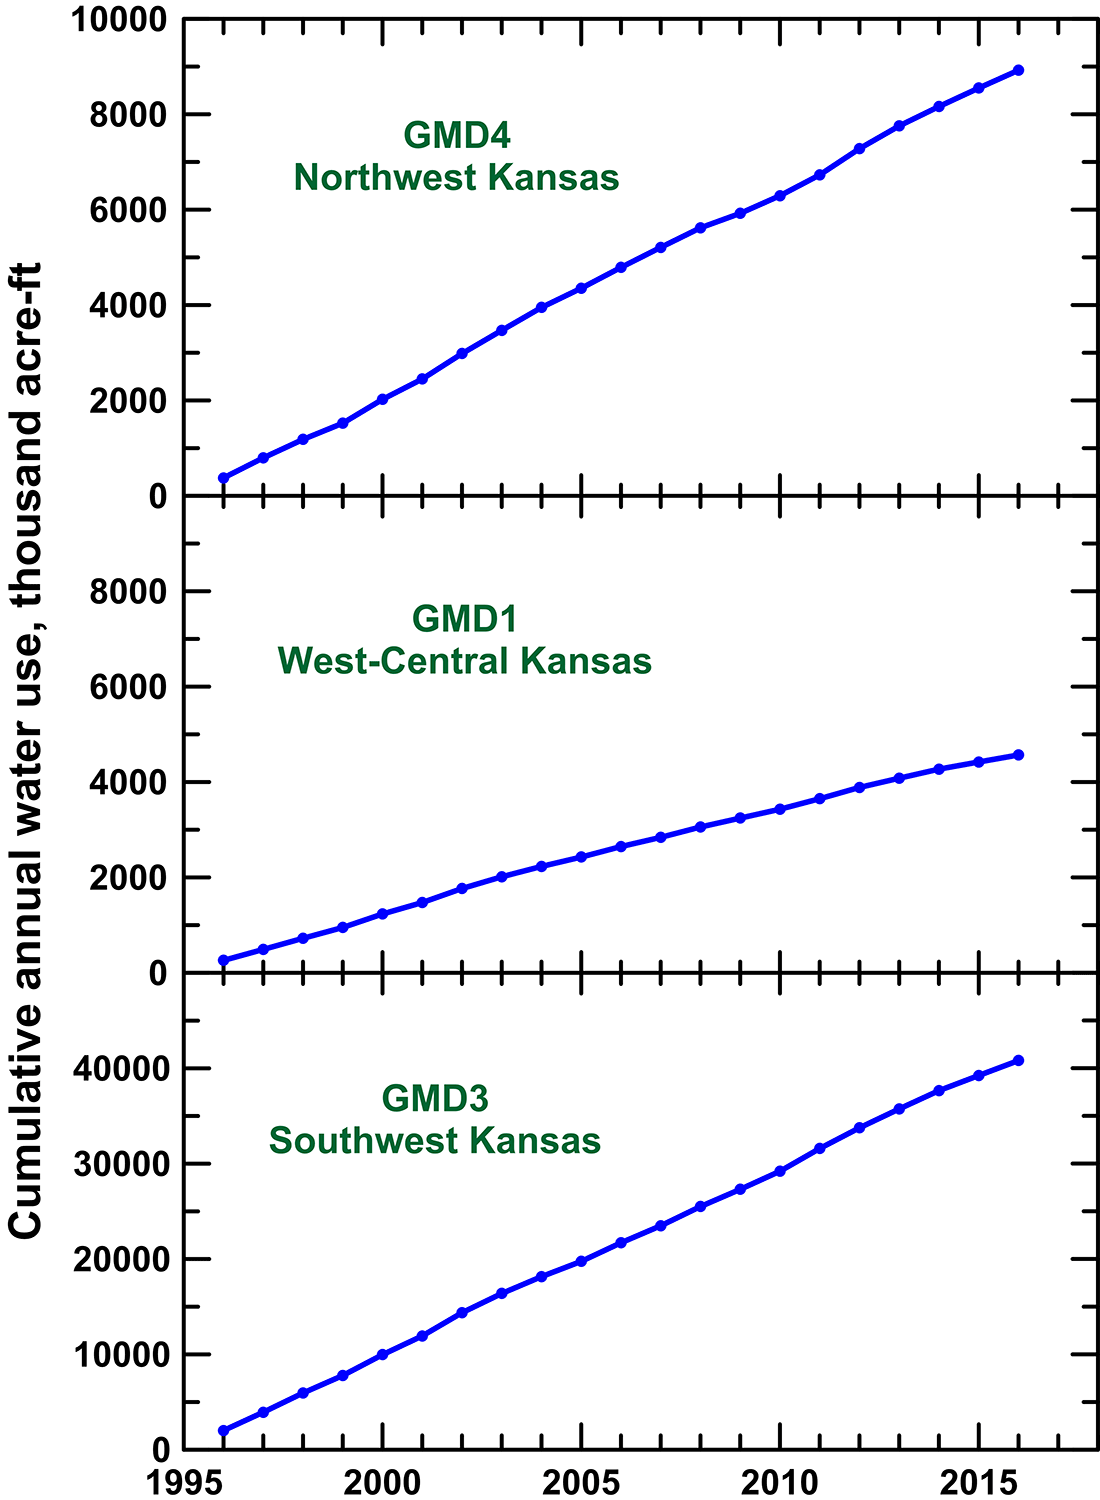 Cumulative annual groundwater use for the three GMDs in the Ogallala region for 1996-2016.